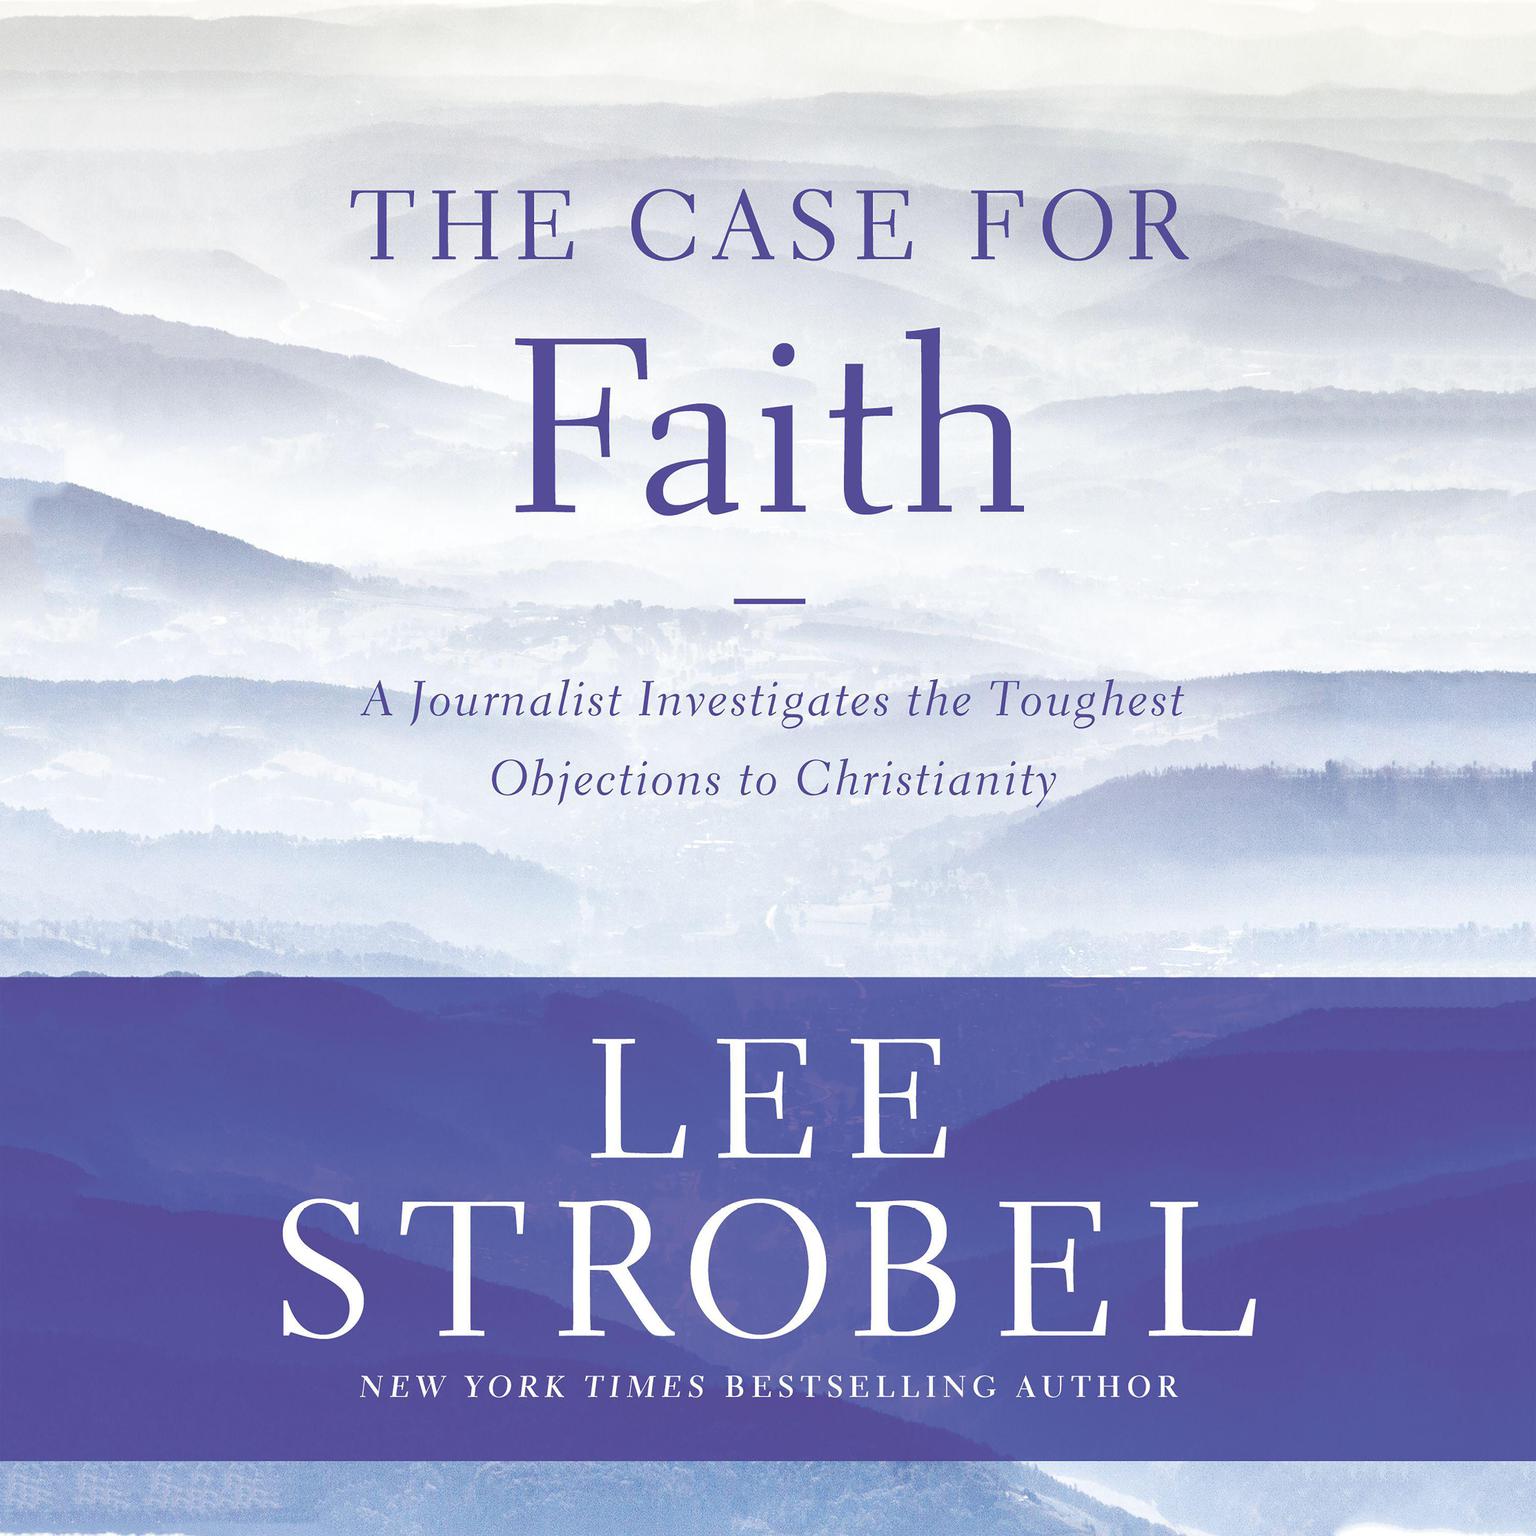 The Case for Faith (Abridged): A Journalist Investigates the Toughest Objections to Christianity Audiobook, by Lee Strobel